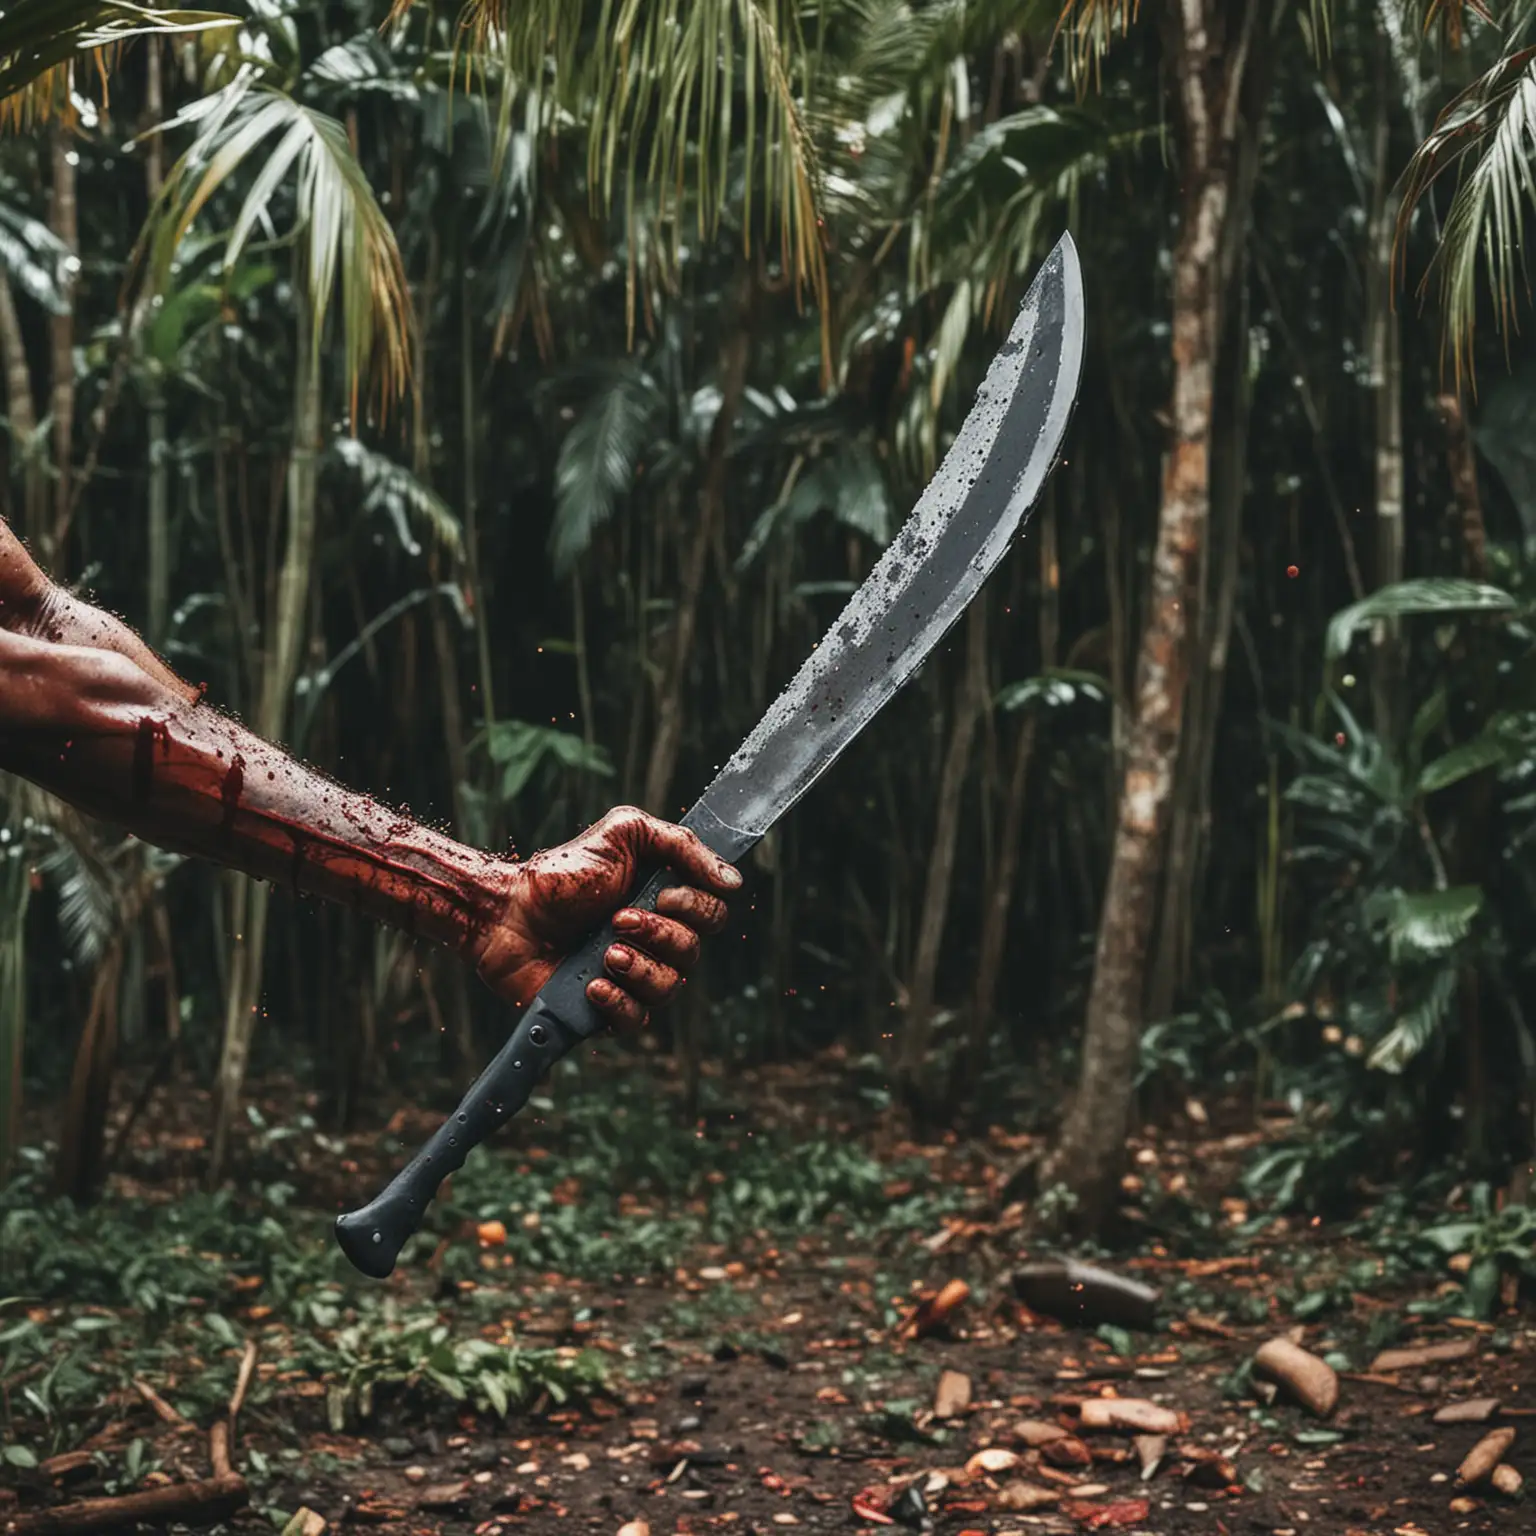 Tropical Wilderness Bloodied Hands with Machete